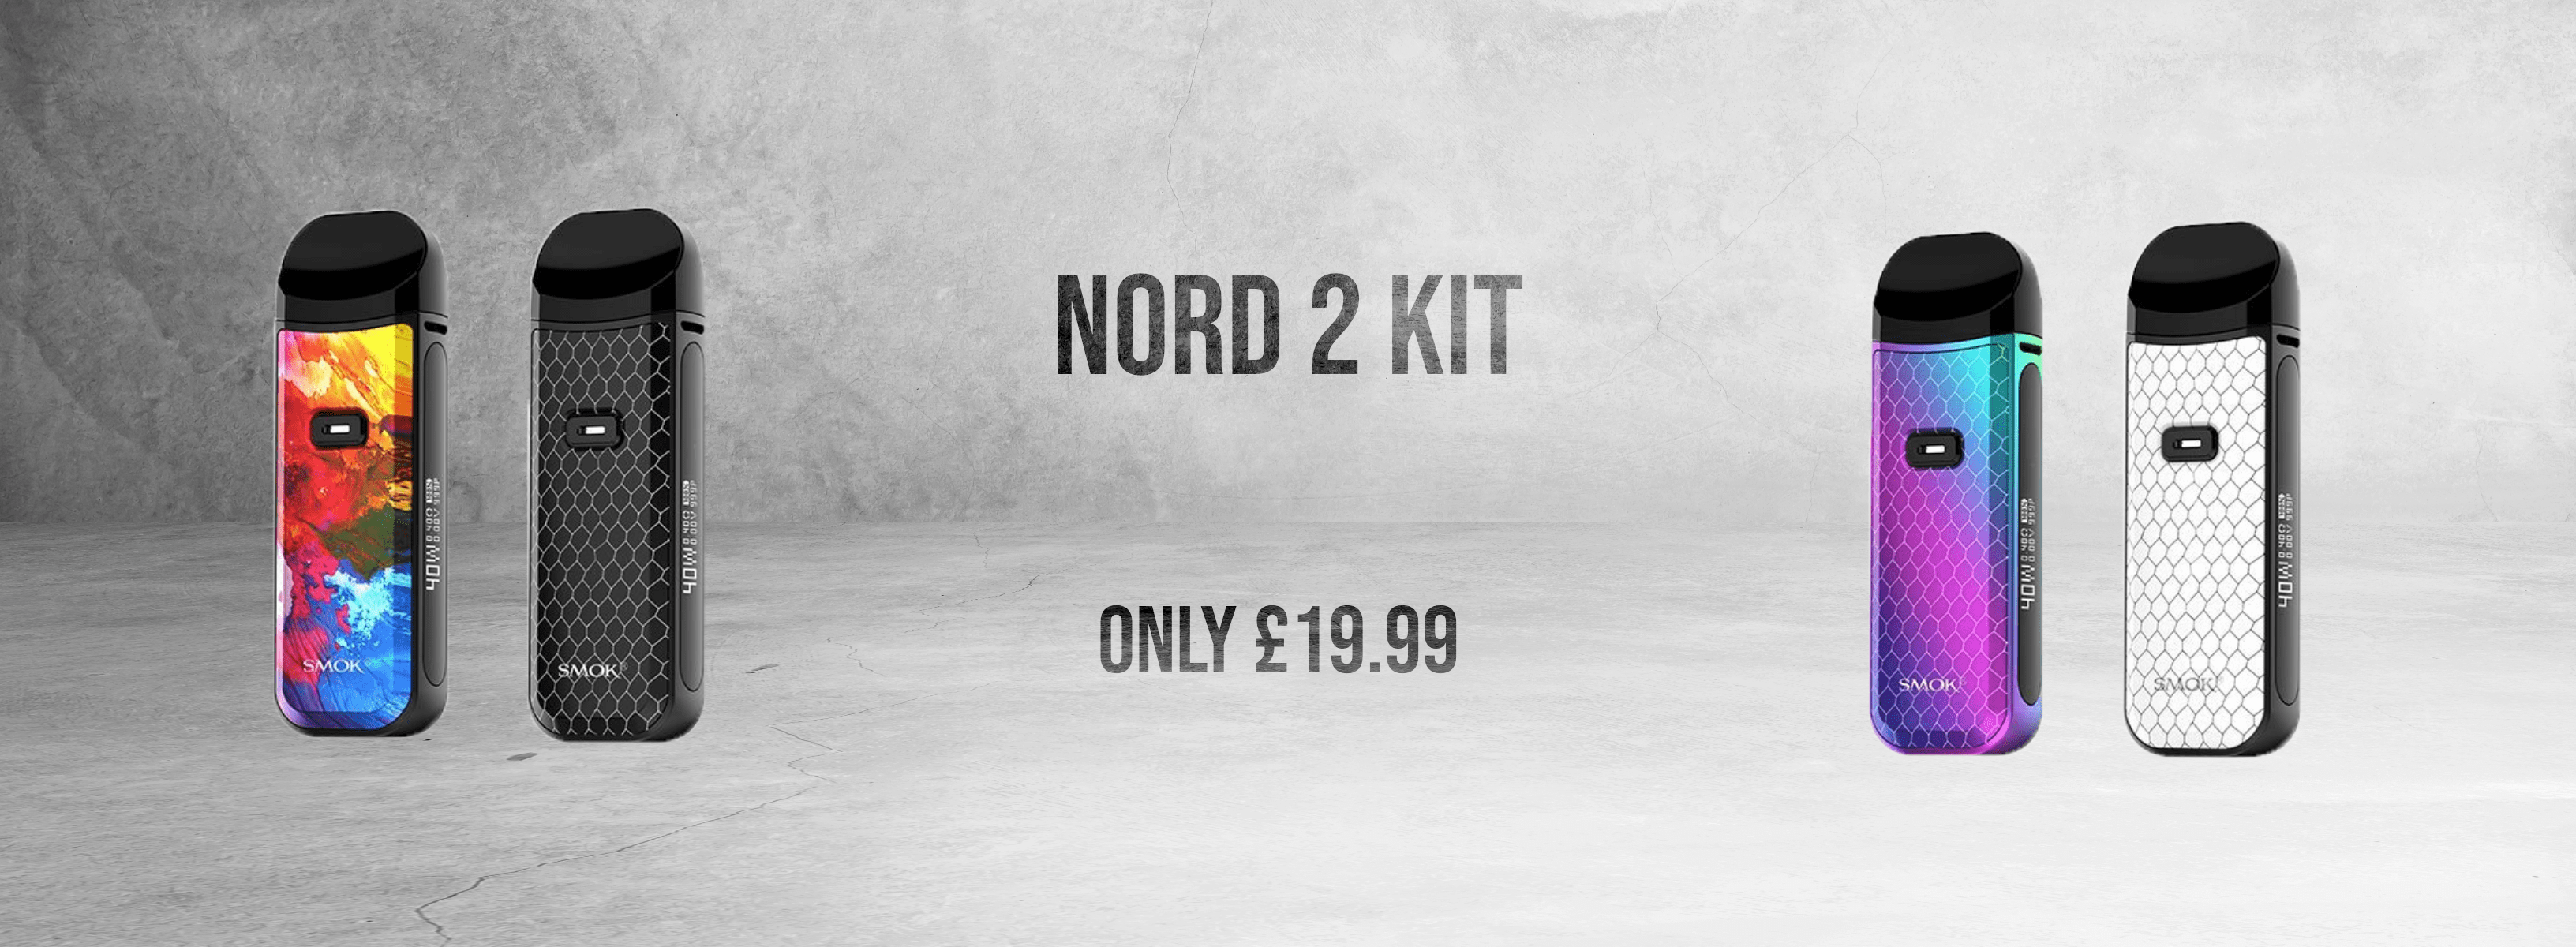 Advert for the Nord 2 Kit